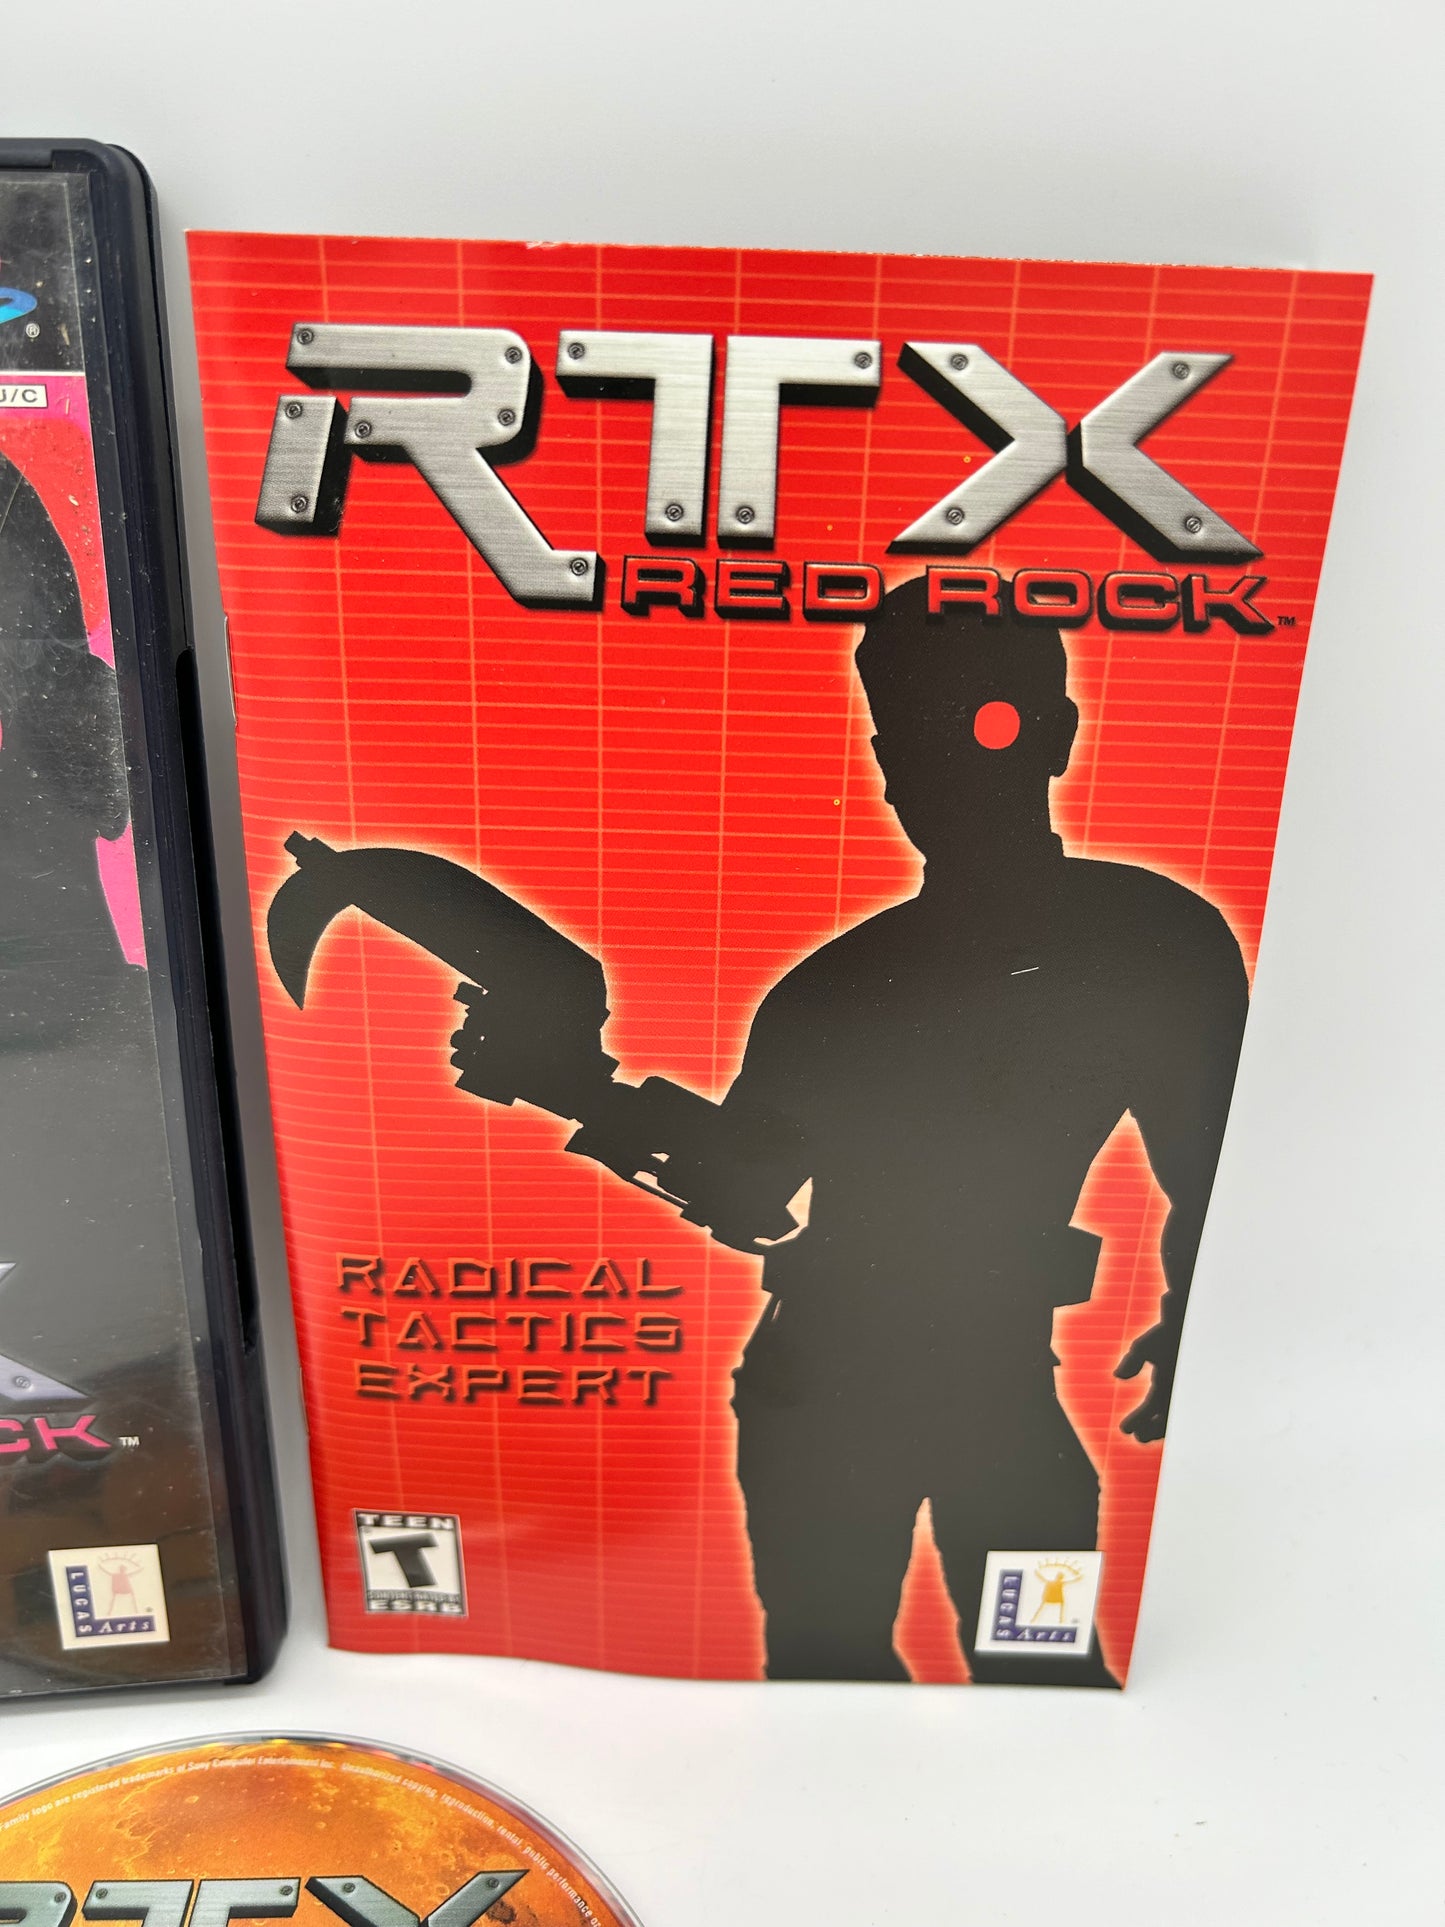 SONY PLAYSTATiON 2 [PS2] | RTX RED ROCK RADiCAL TACTiCS EXPERT